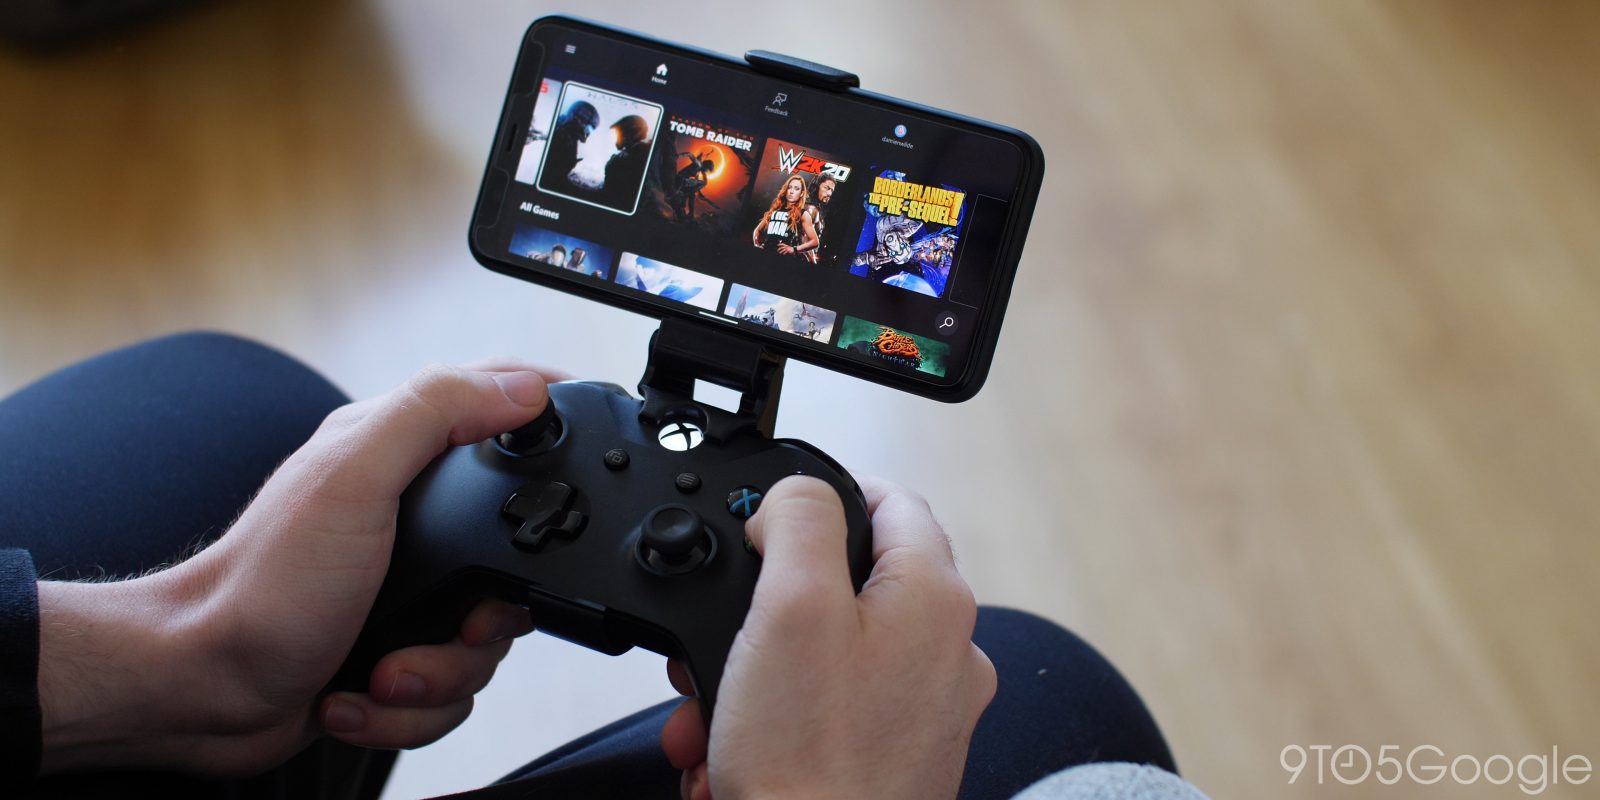 How to play Xbox games on your phone with Xbox Cloud Gaming